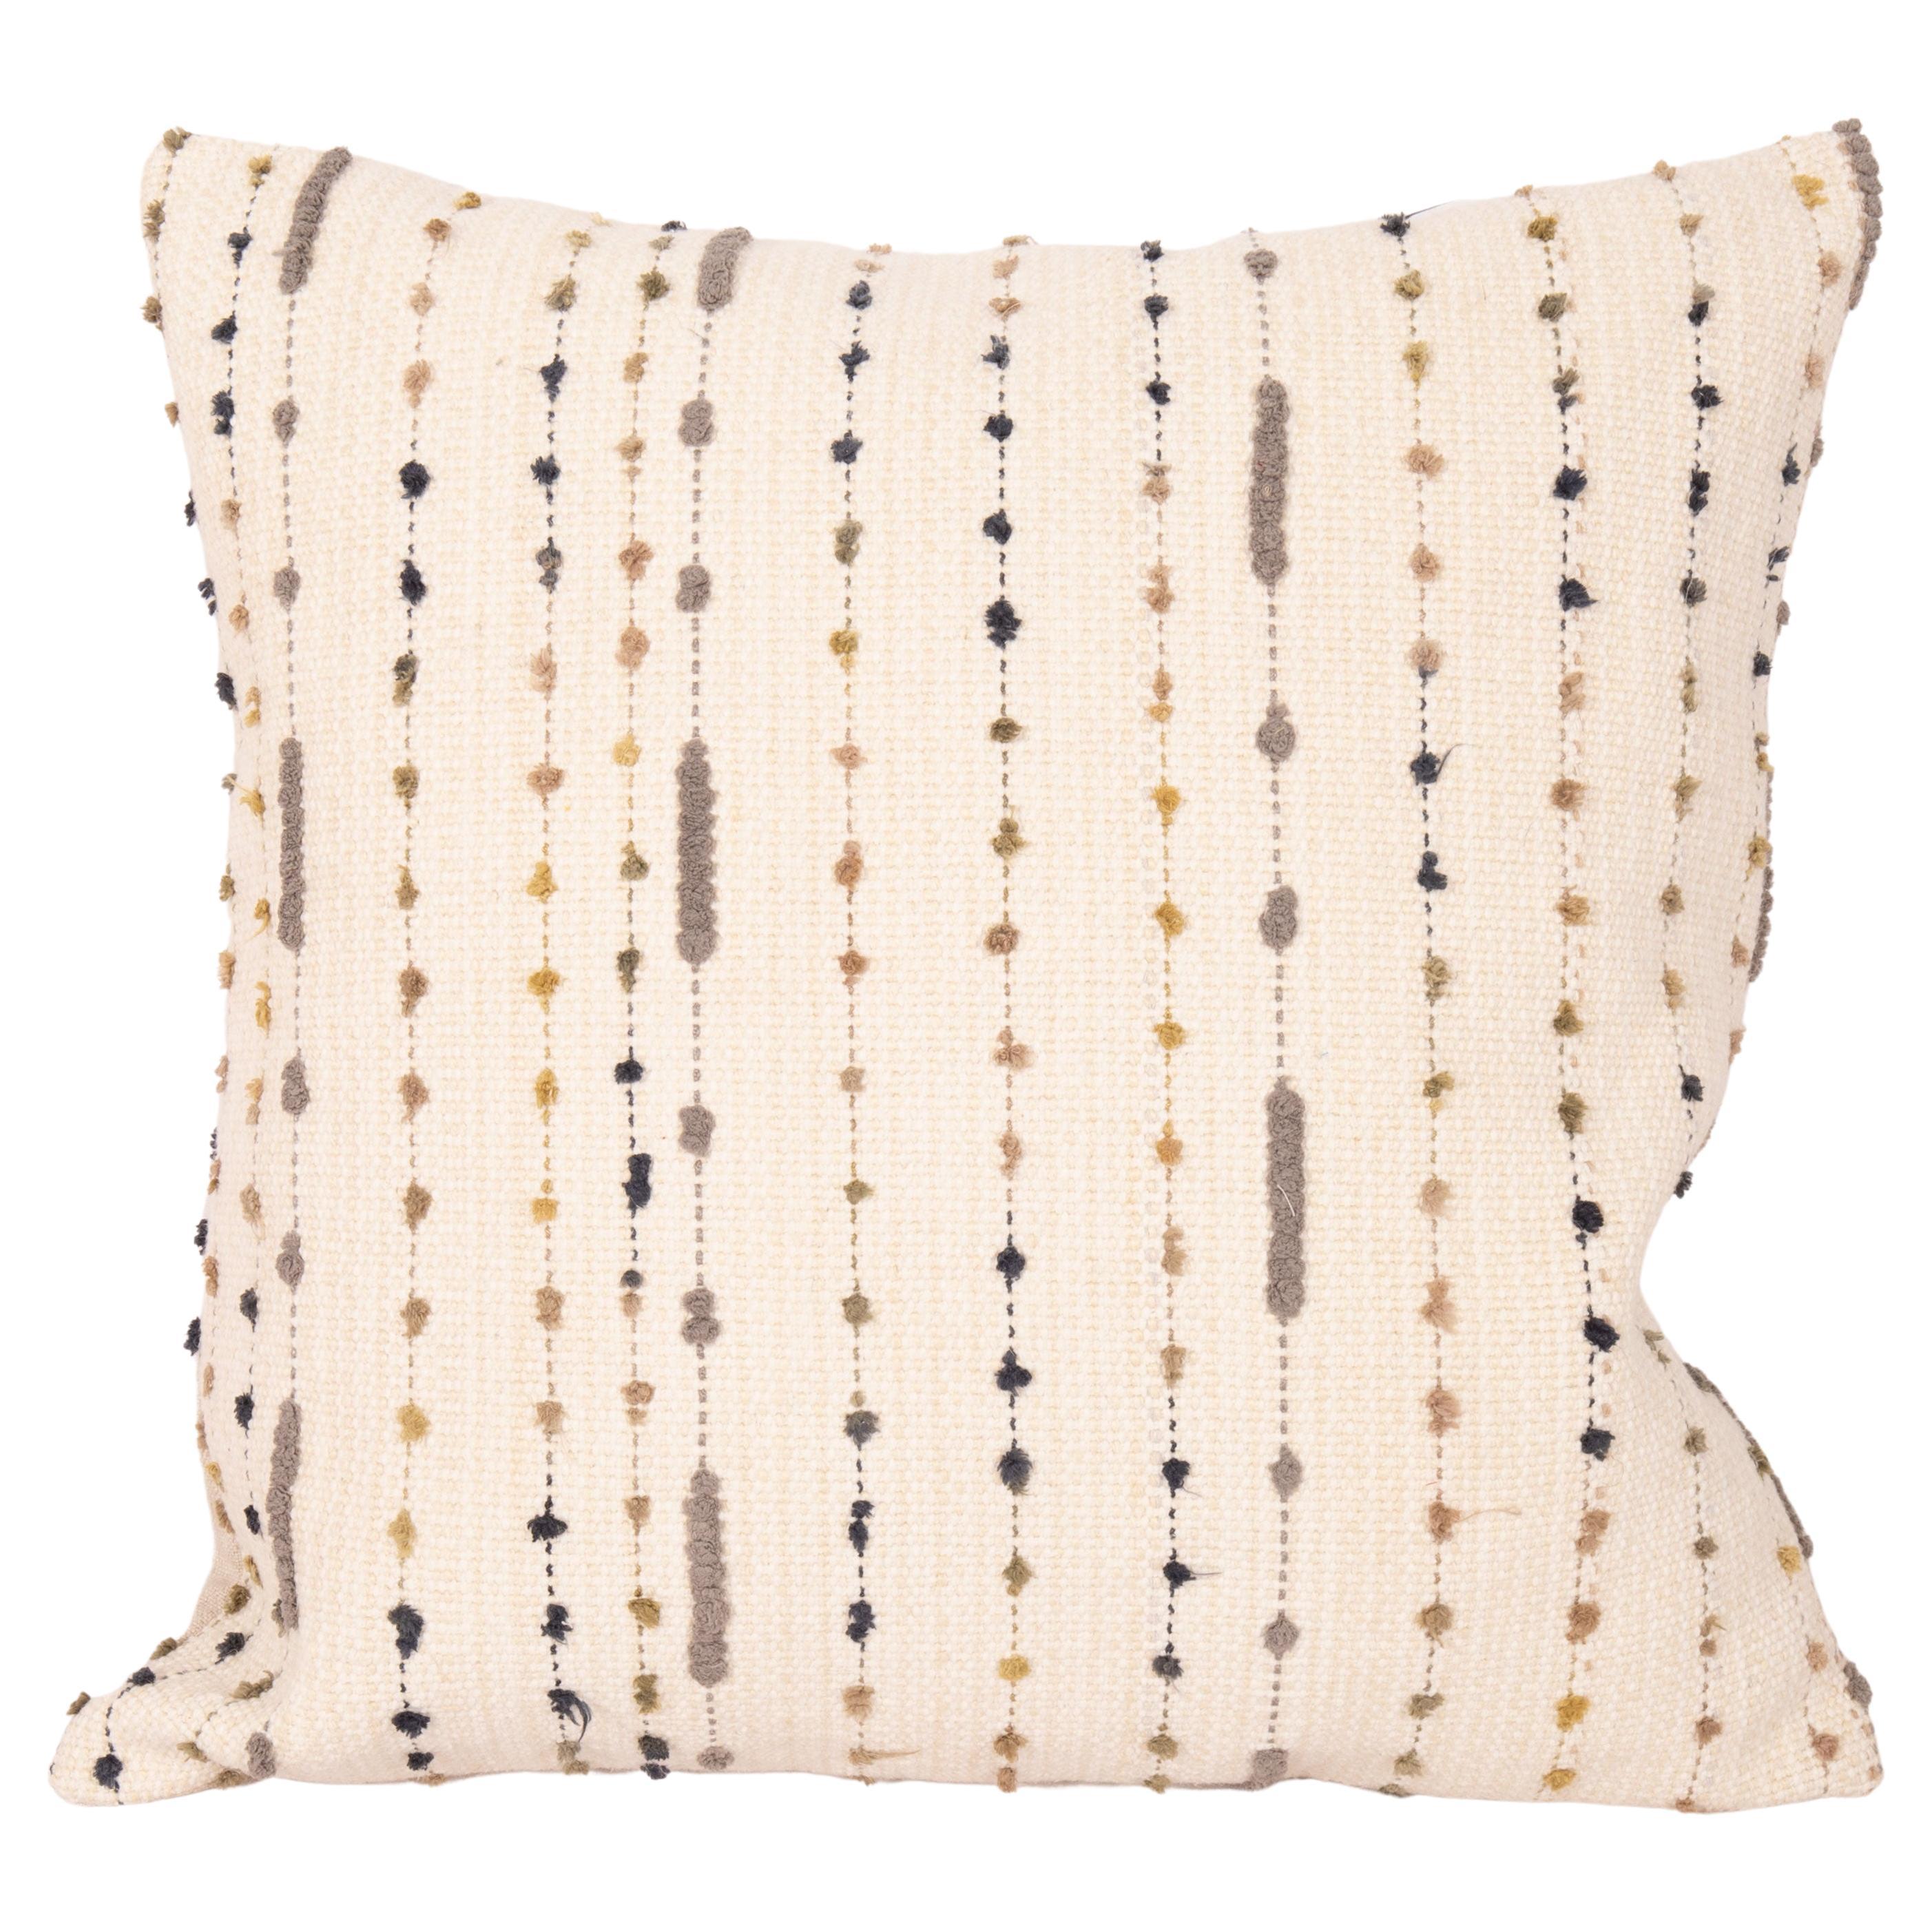 Pillowcase Made from a Contemporary Cotton Kilim For Sale